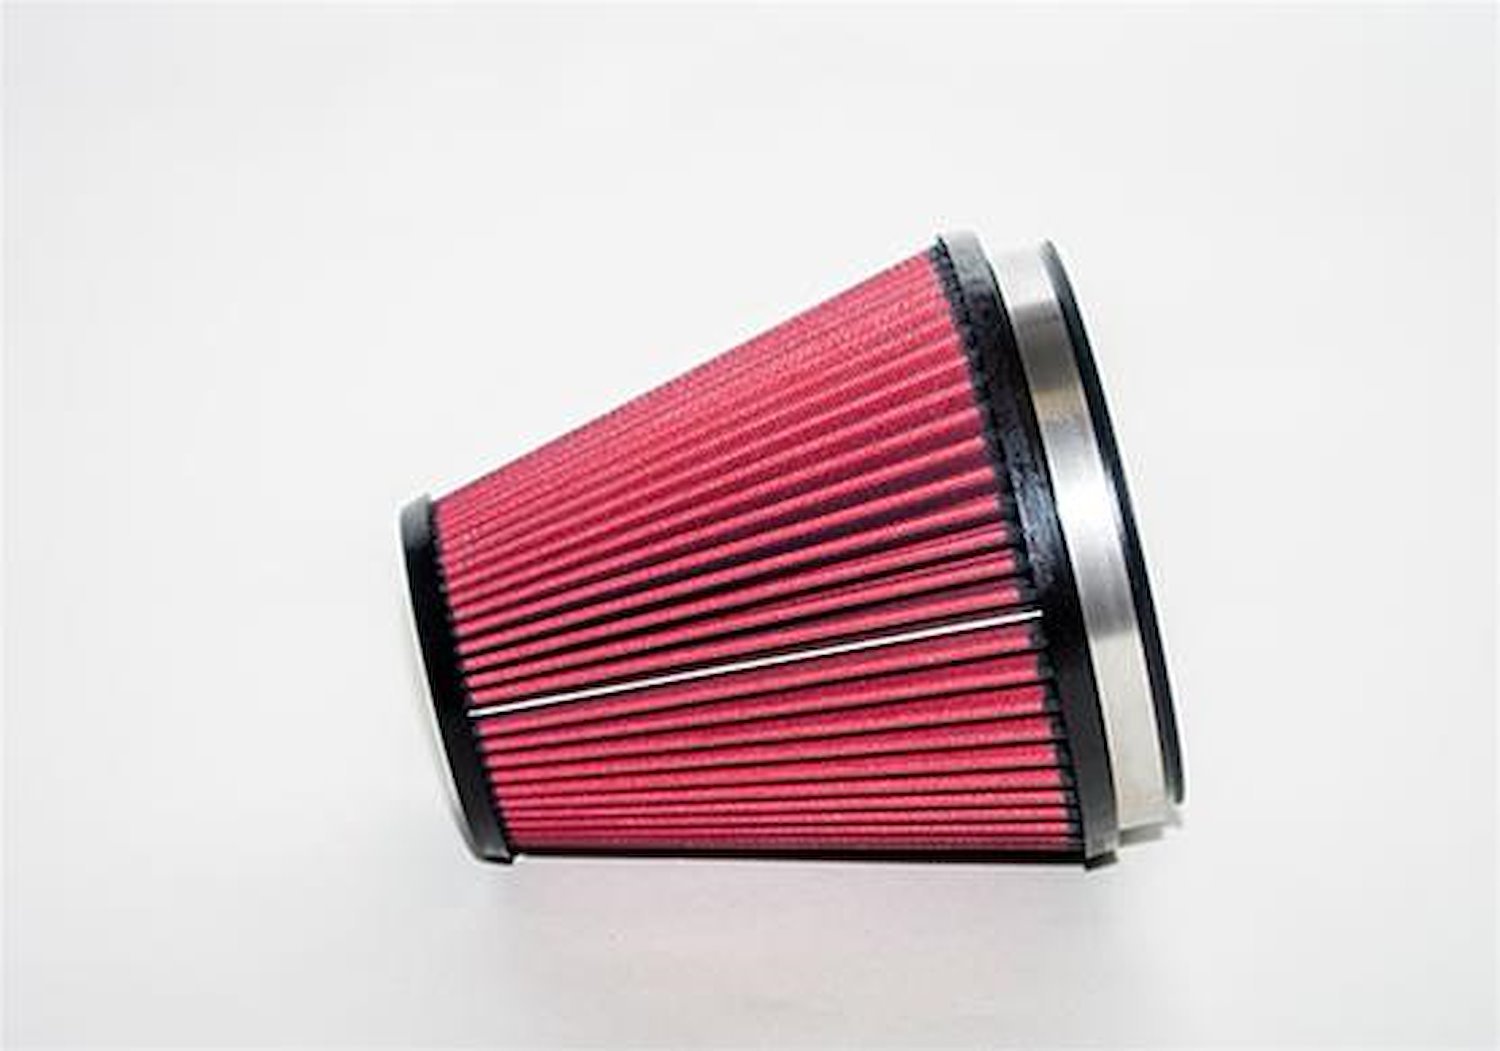 089999-00006 Replacement Air Filter for 2015-2019 Ford 2.3L/2.7L/3.5L/3.7L/5.0L Engines